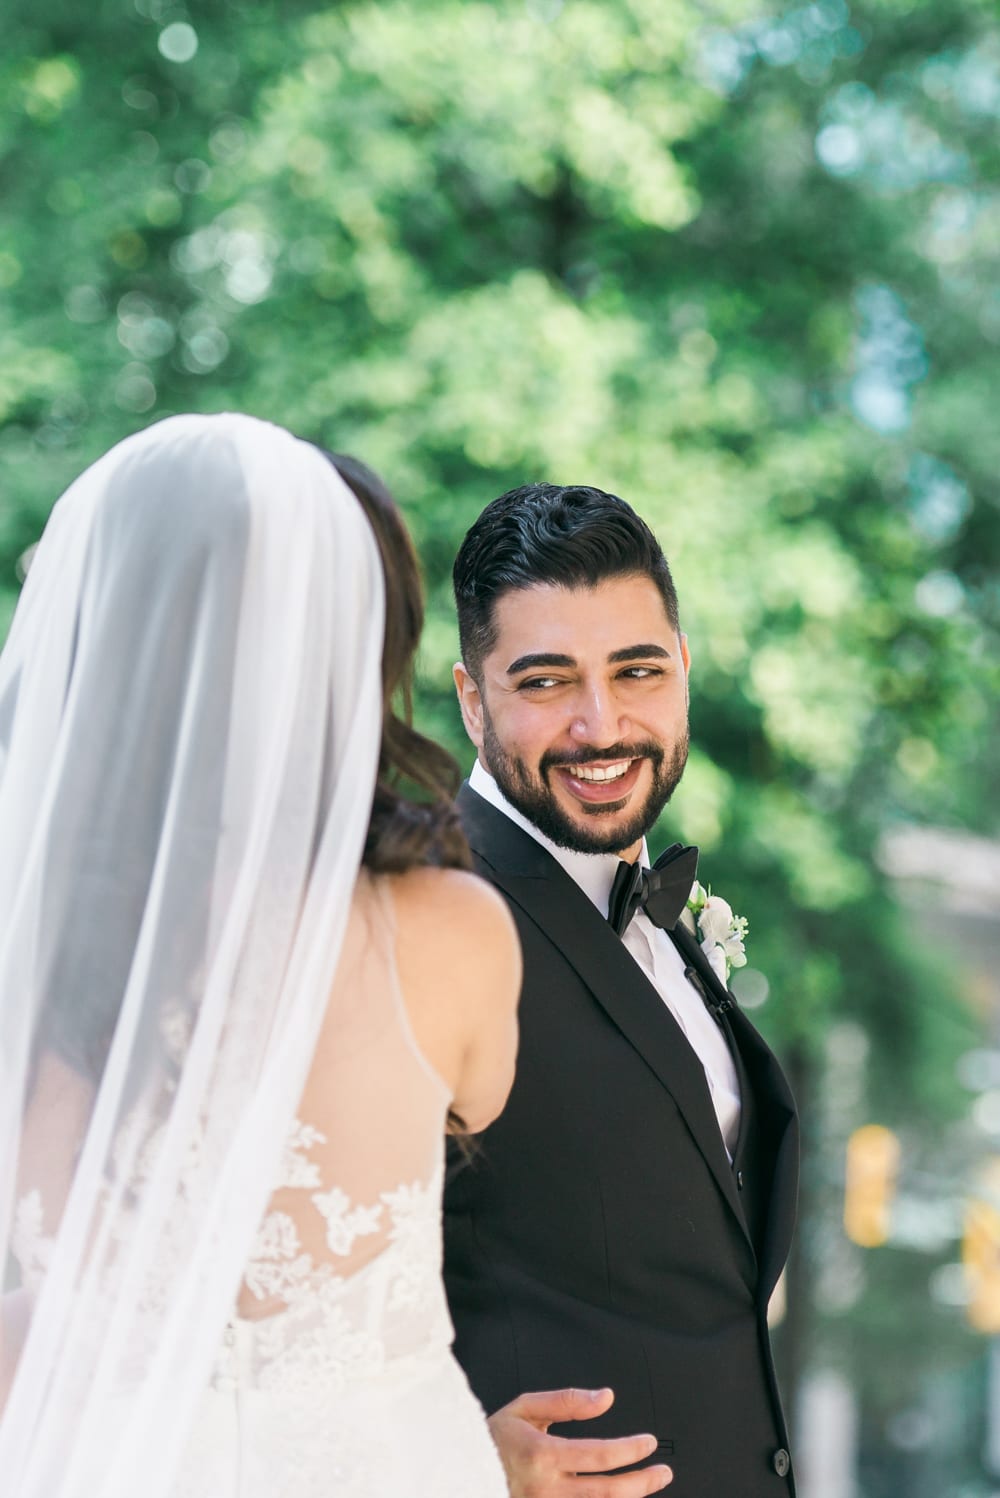 A Vintage Persian Wedding in Vancouver - Couple's first look